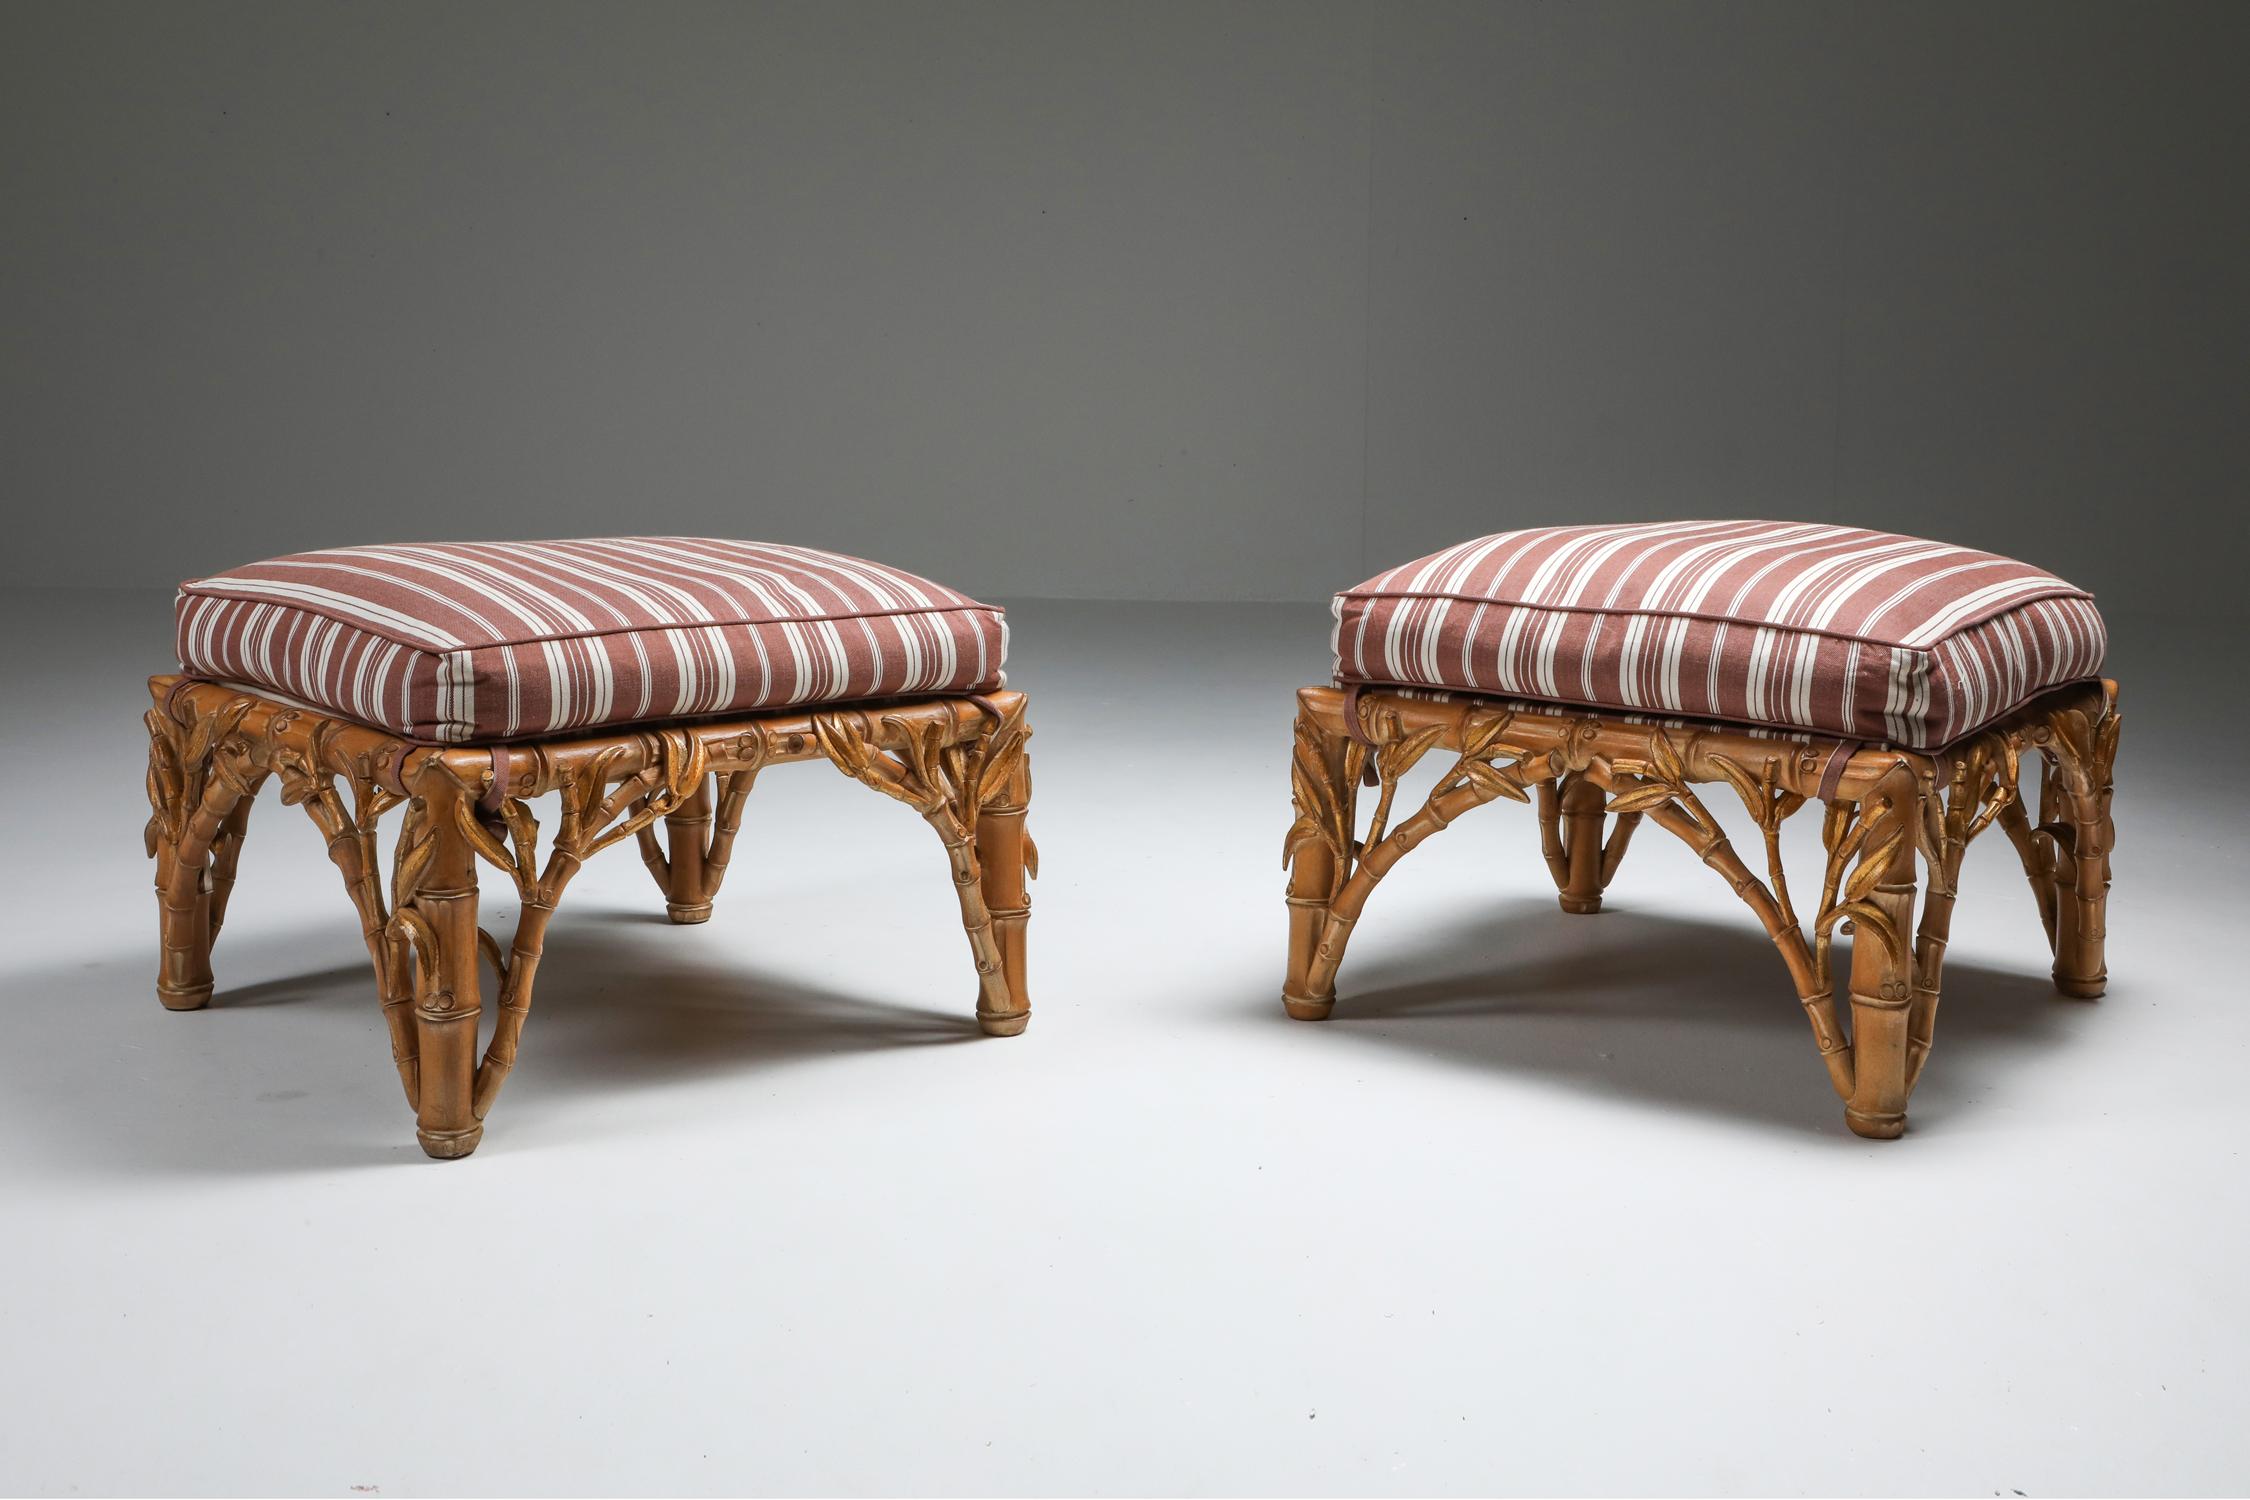 Faux bamboo ottoman in carved wood by Arpex, Italy, 1970s

Tropicalist Italian glam pair of ottoman in the manner of Vivai del Sud and Gabriella Crespi.
Fits well in a Hollywood Regency inspired eclectic decor.

